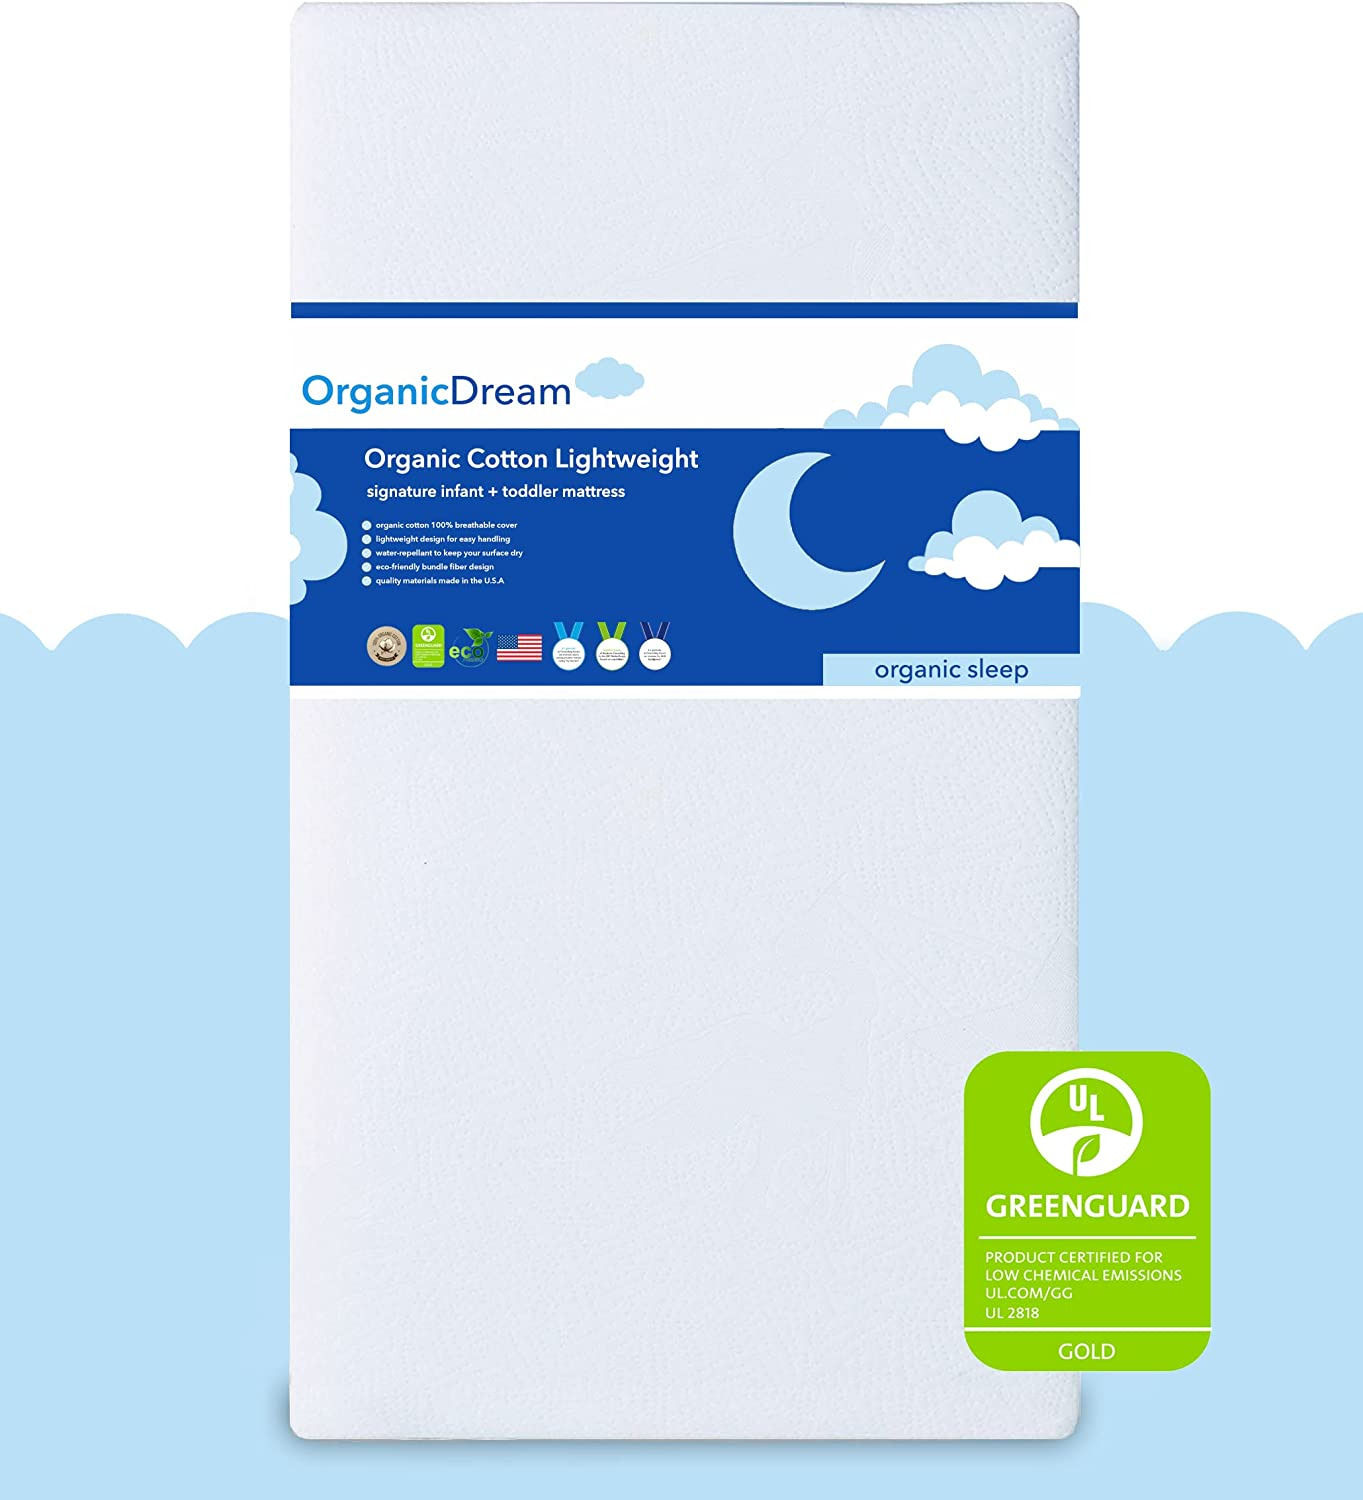 Organic Dream Crib And Toddler Mattress - 100% Breathable Proven To Reduce Suffo